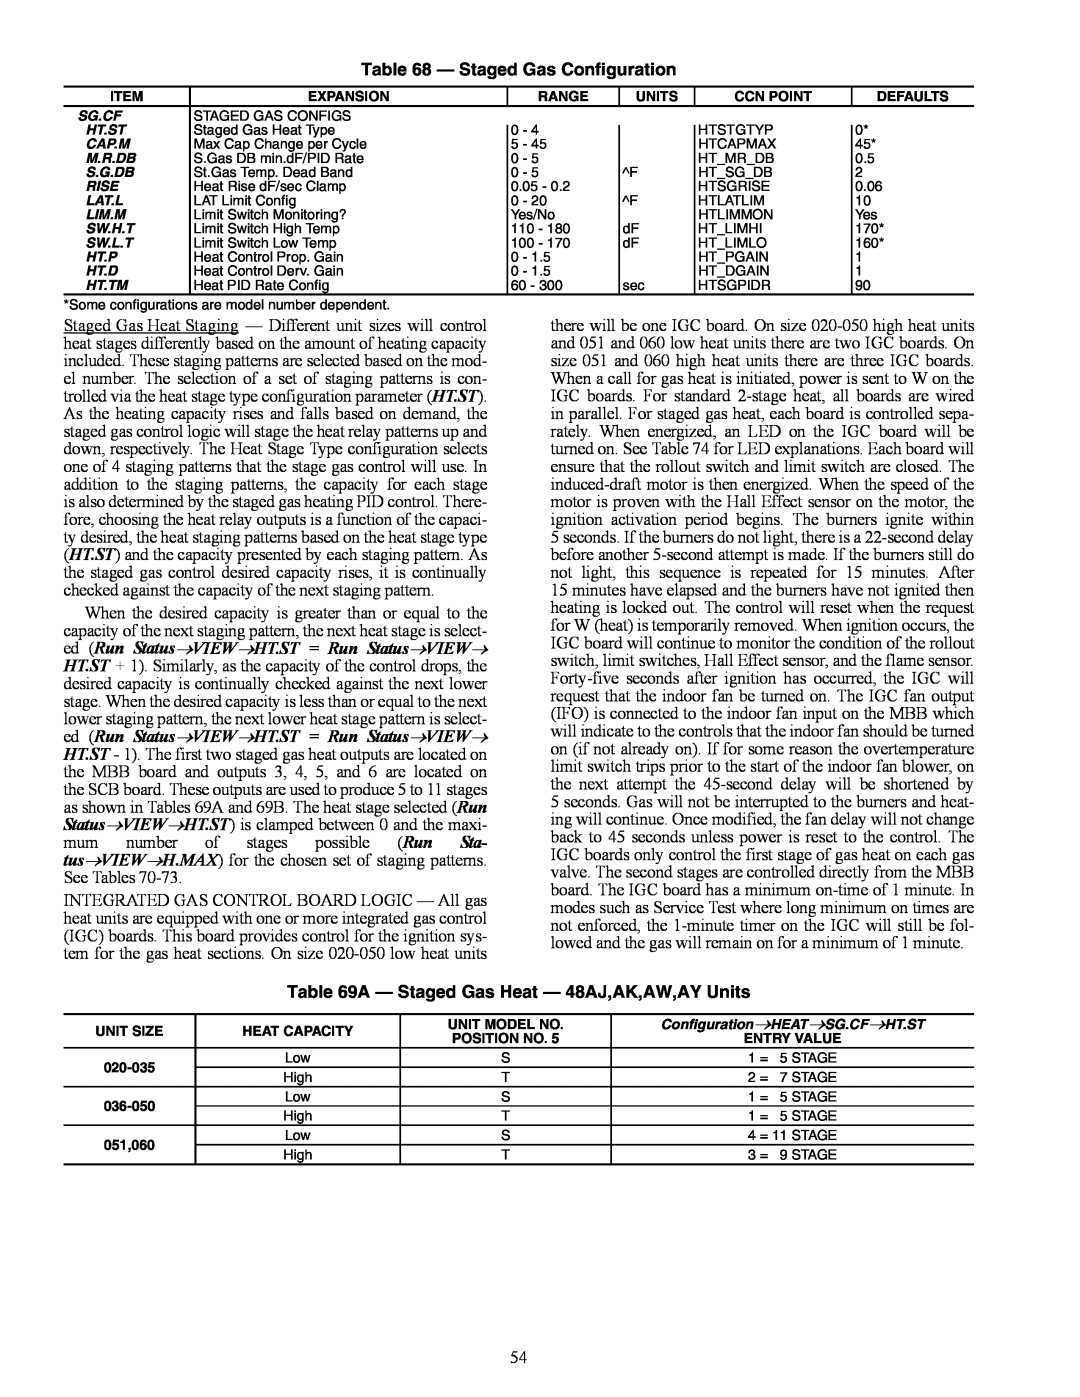 Carrier 48/50AJ specifications Staged Gas Configuration, A — Staged Gas Heat — 48AJ,AK,AW,AY Units 